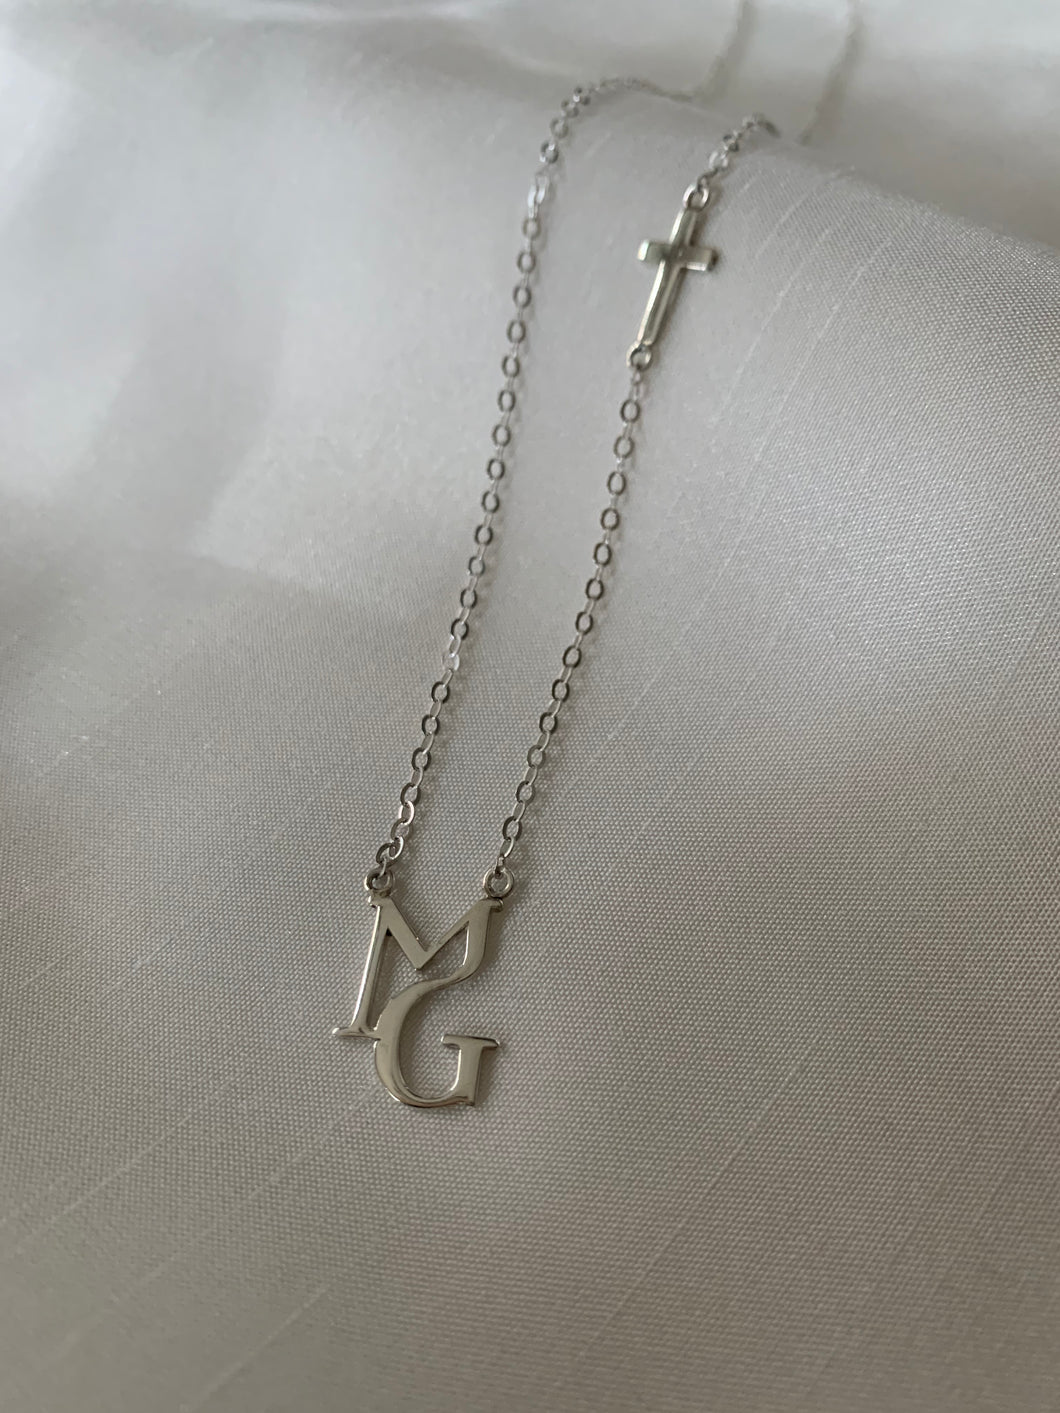 With M and G initials in a unique font with a cross at the aide of the chain. White gold.